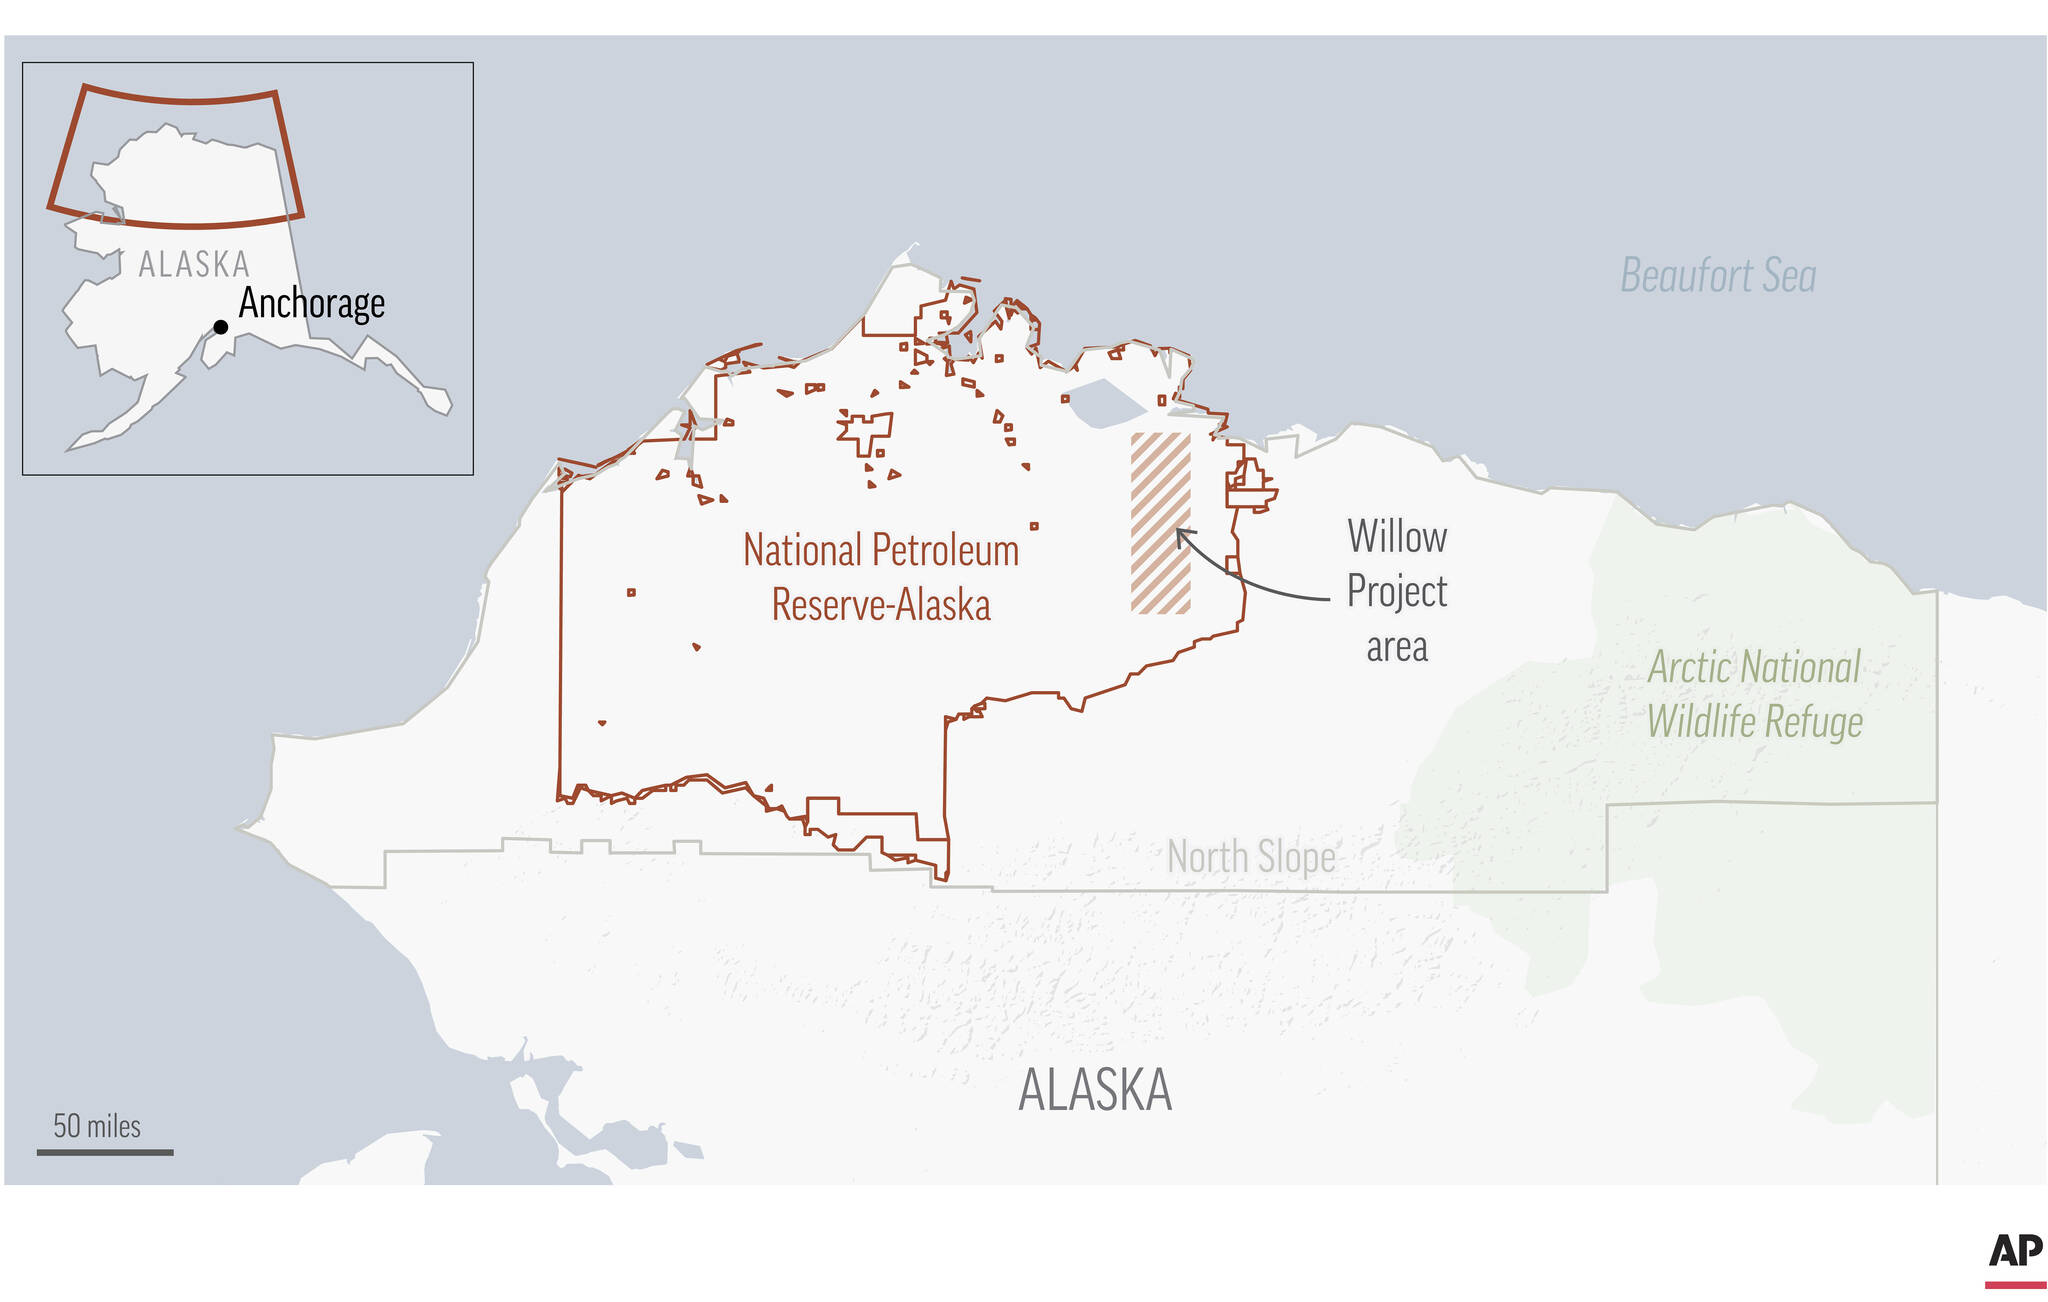 Pressure is building on the social media platform TikTok to urge President Joe Biden to reject an oil development project on Alaska’s North Slope from young voters concerned about climate change.